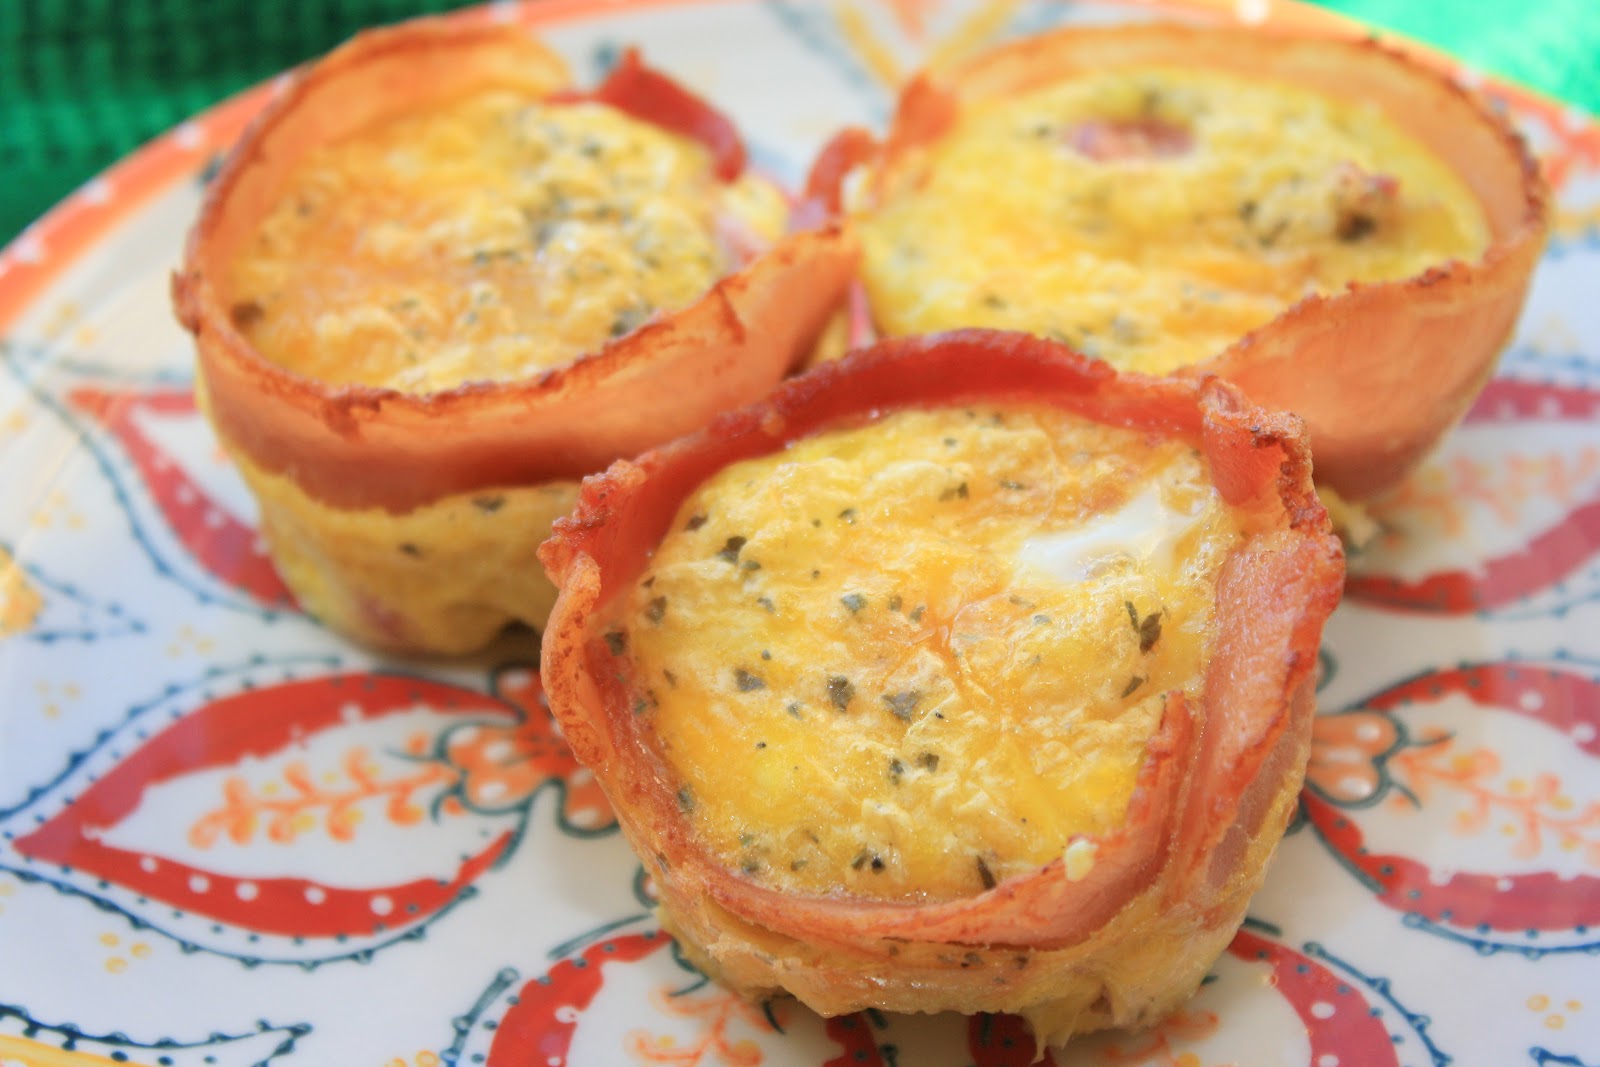 The Bitchin' Kitchin': Bacon & Egg Cups